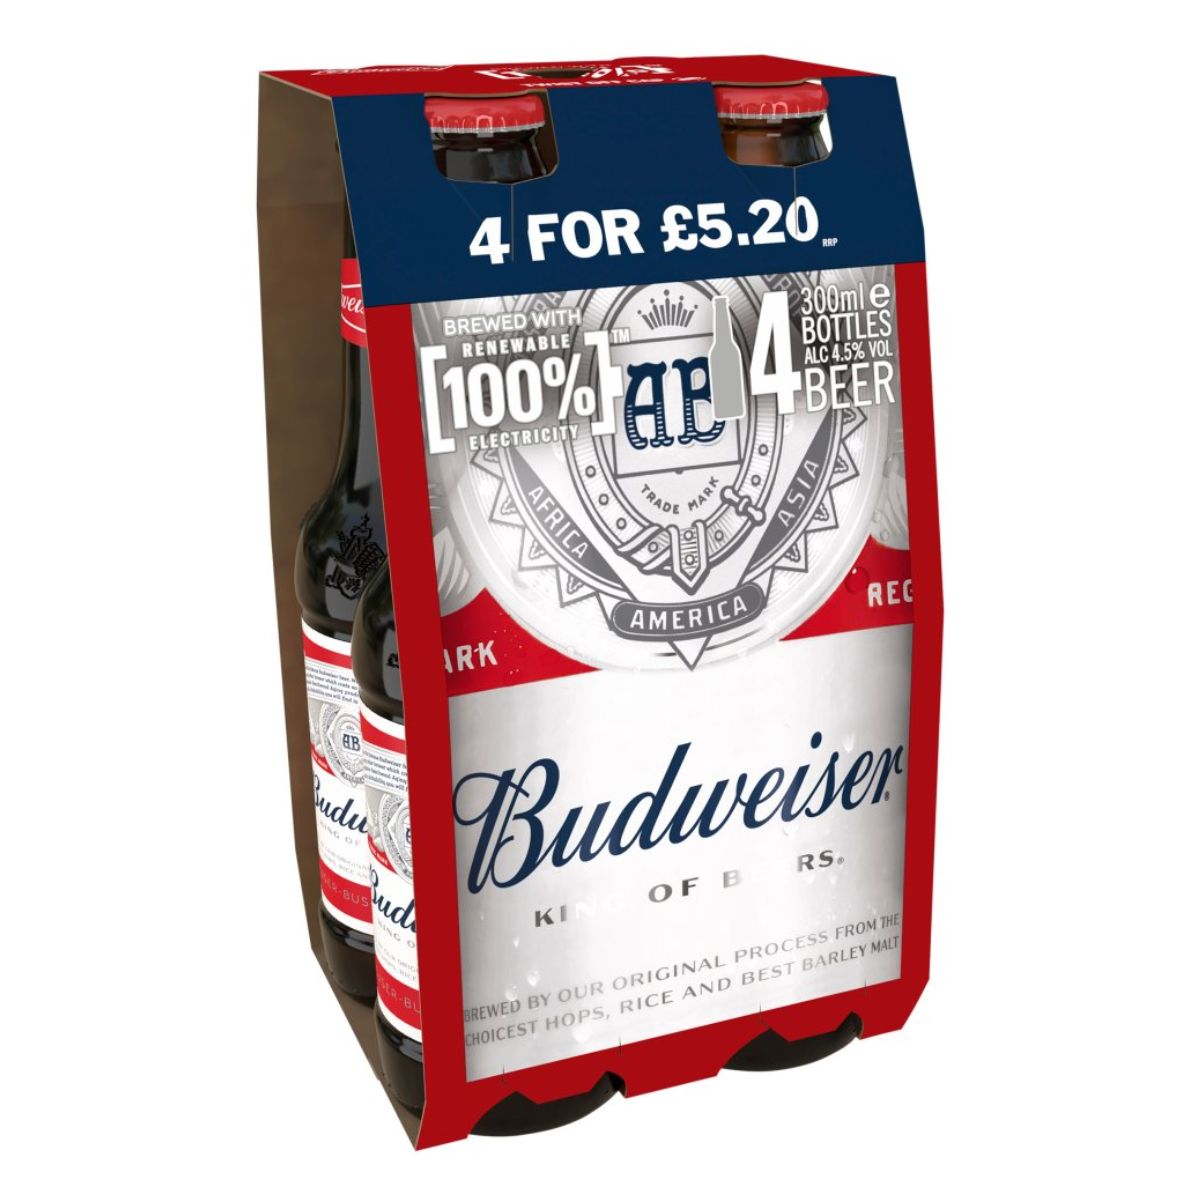 Four bottles of Budweiser - Beer (4.5% ABV) - 4 x 300ml in a box.